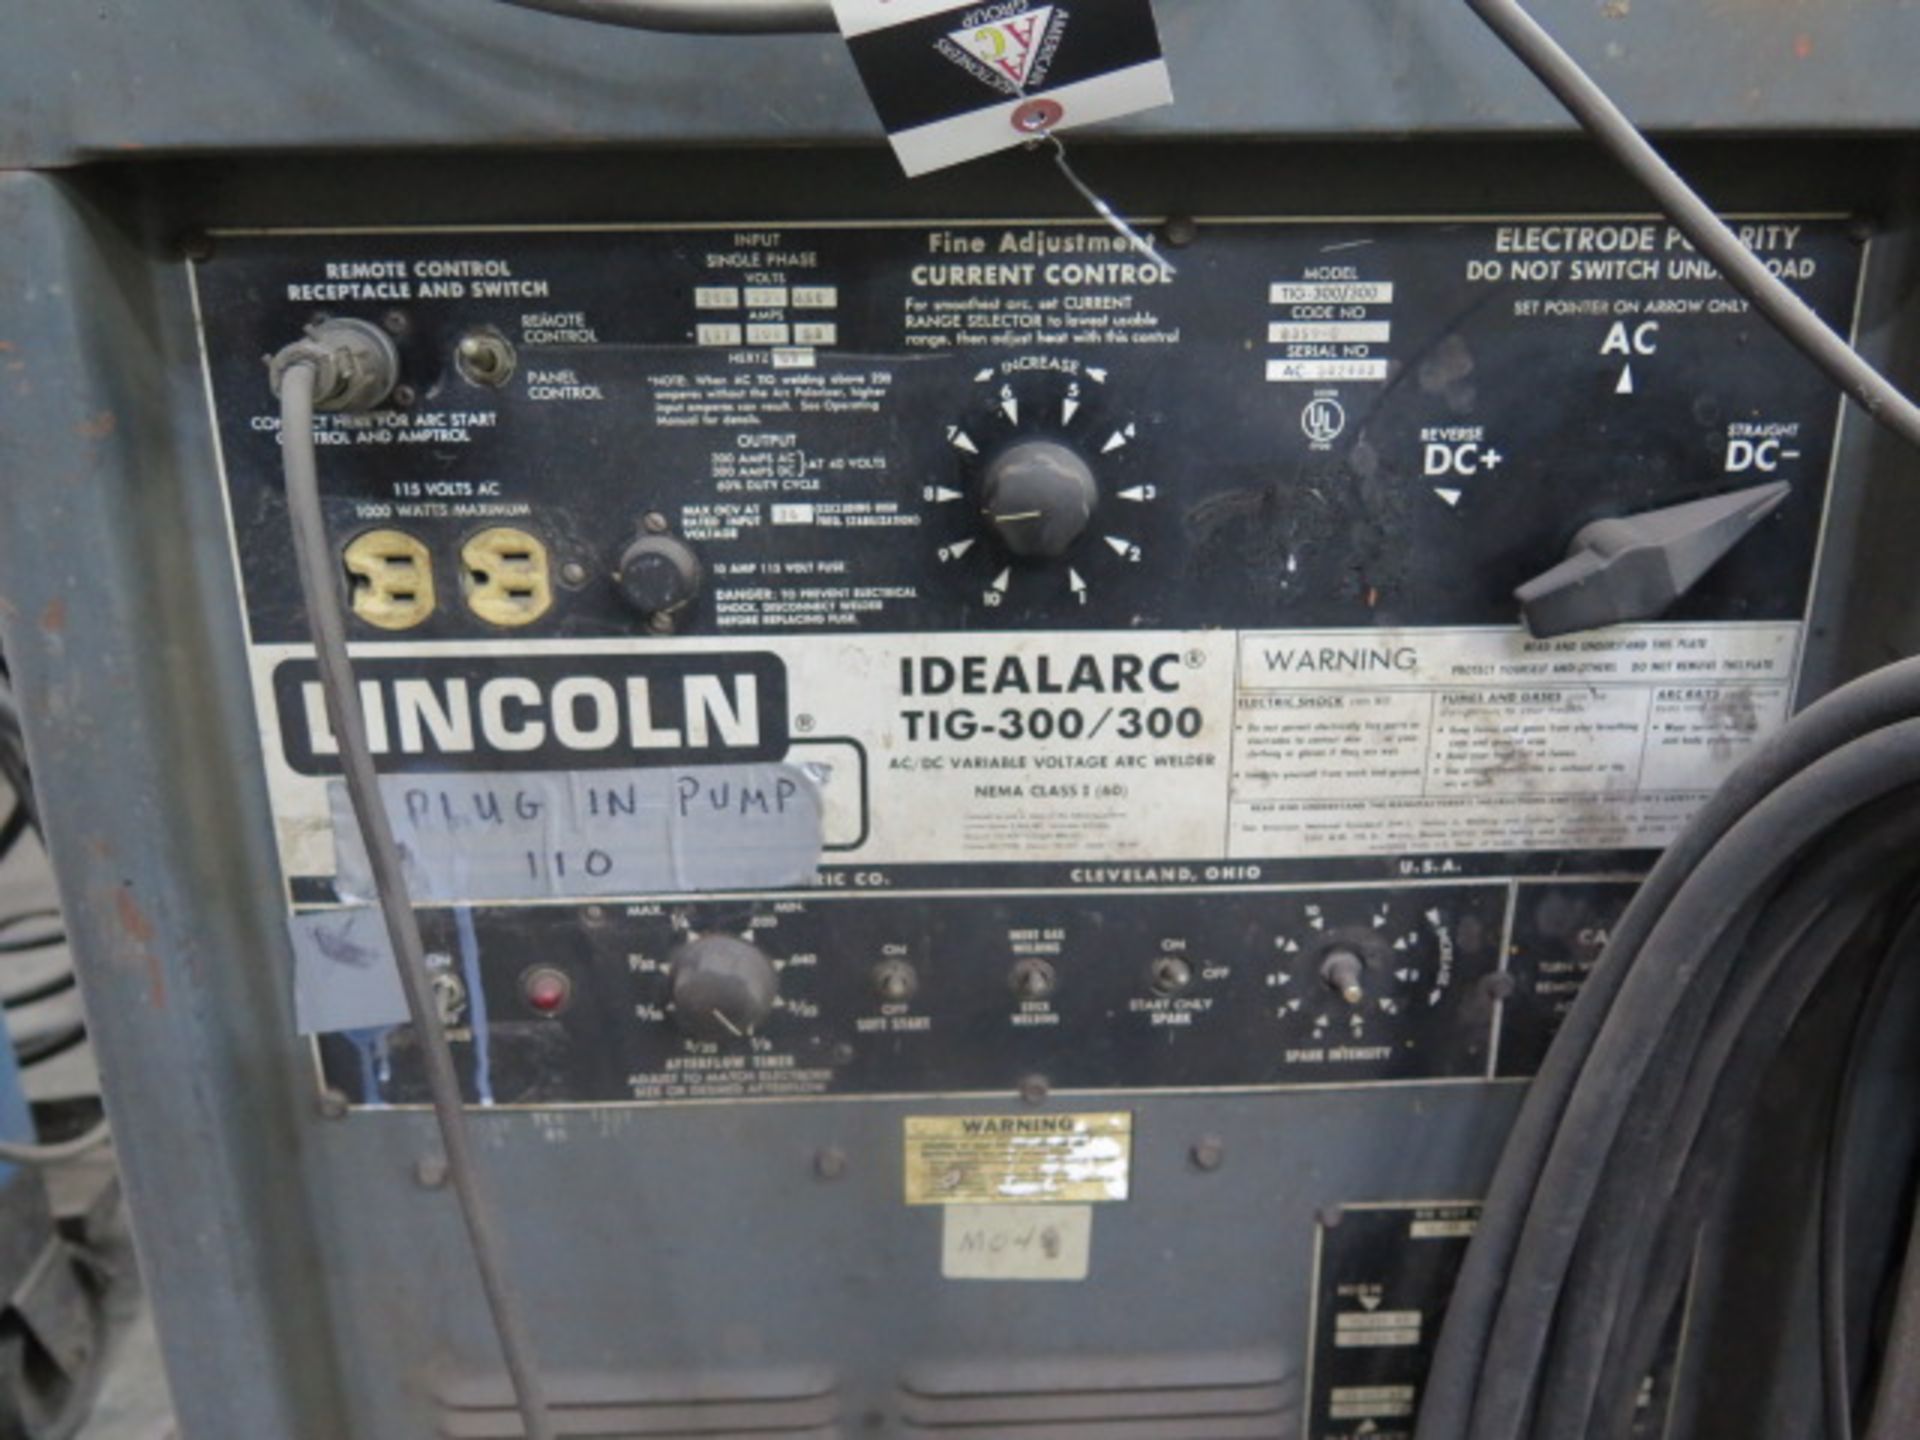 Lincoln Idealarc TIG 300/300 AC/DC Variable Voltage Welding Power Source (SOLD AS-IS - NO WARRANTY) - Image 5 of 6